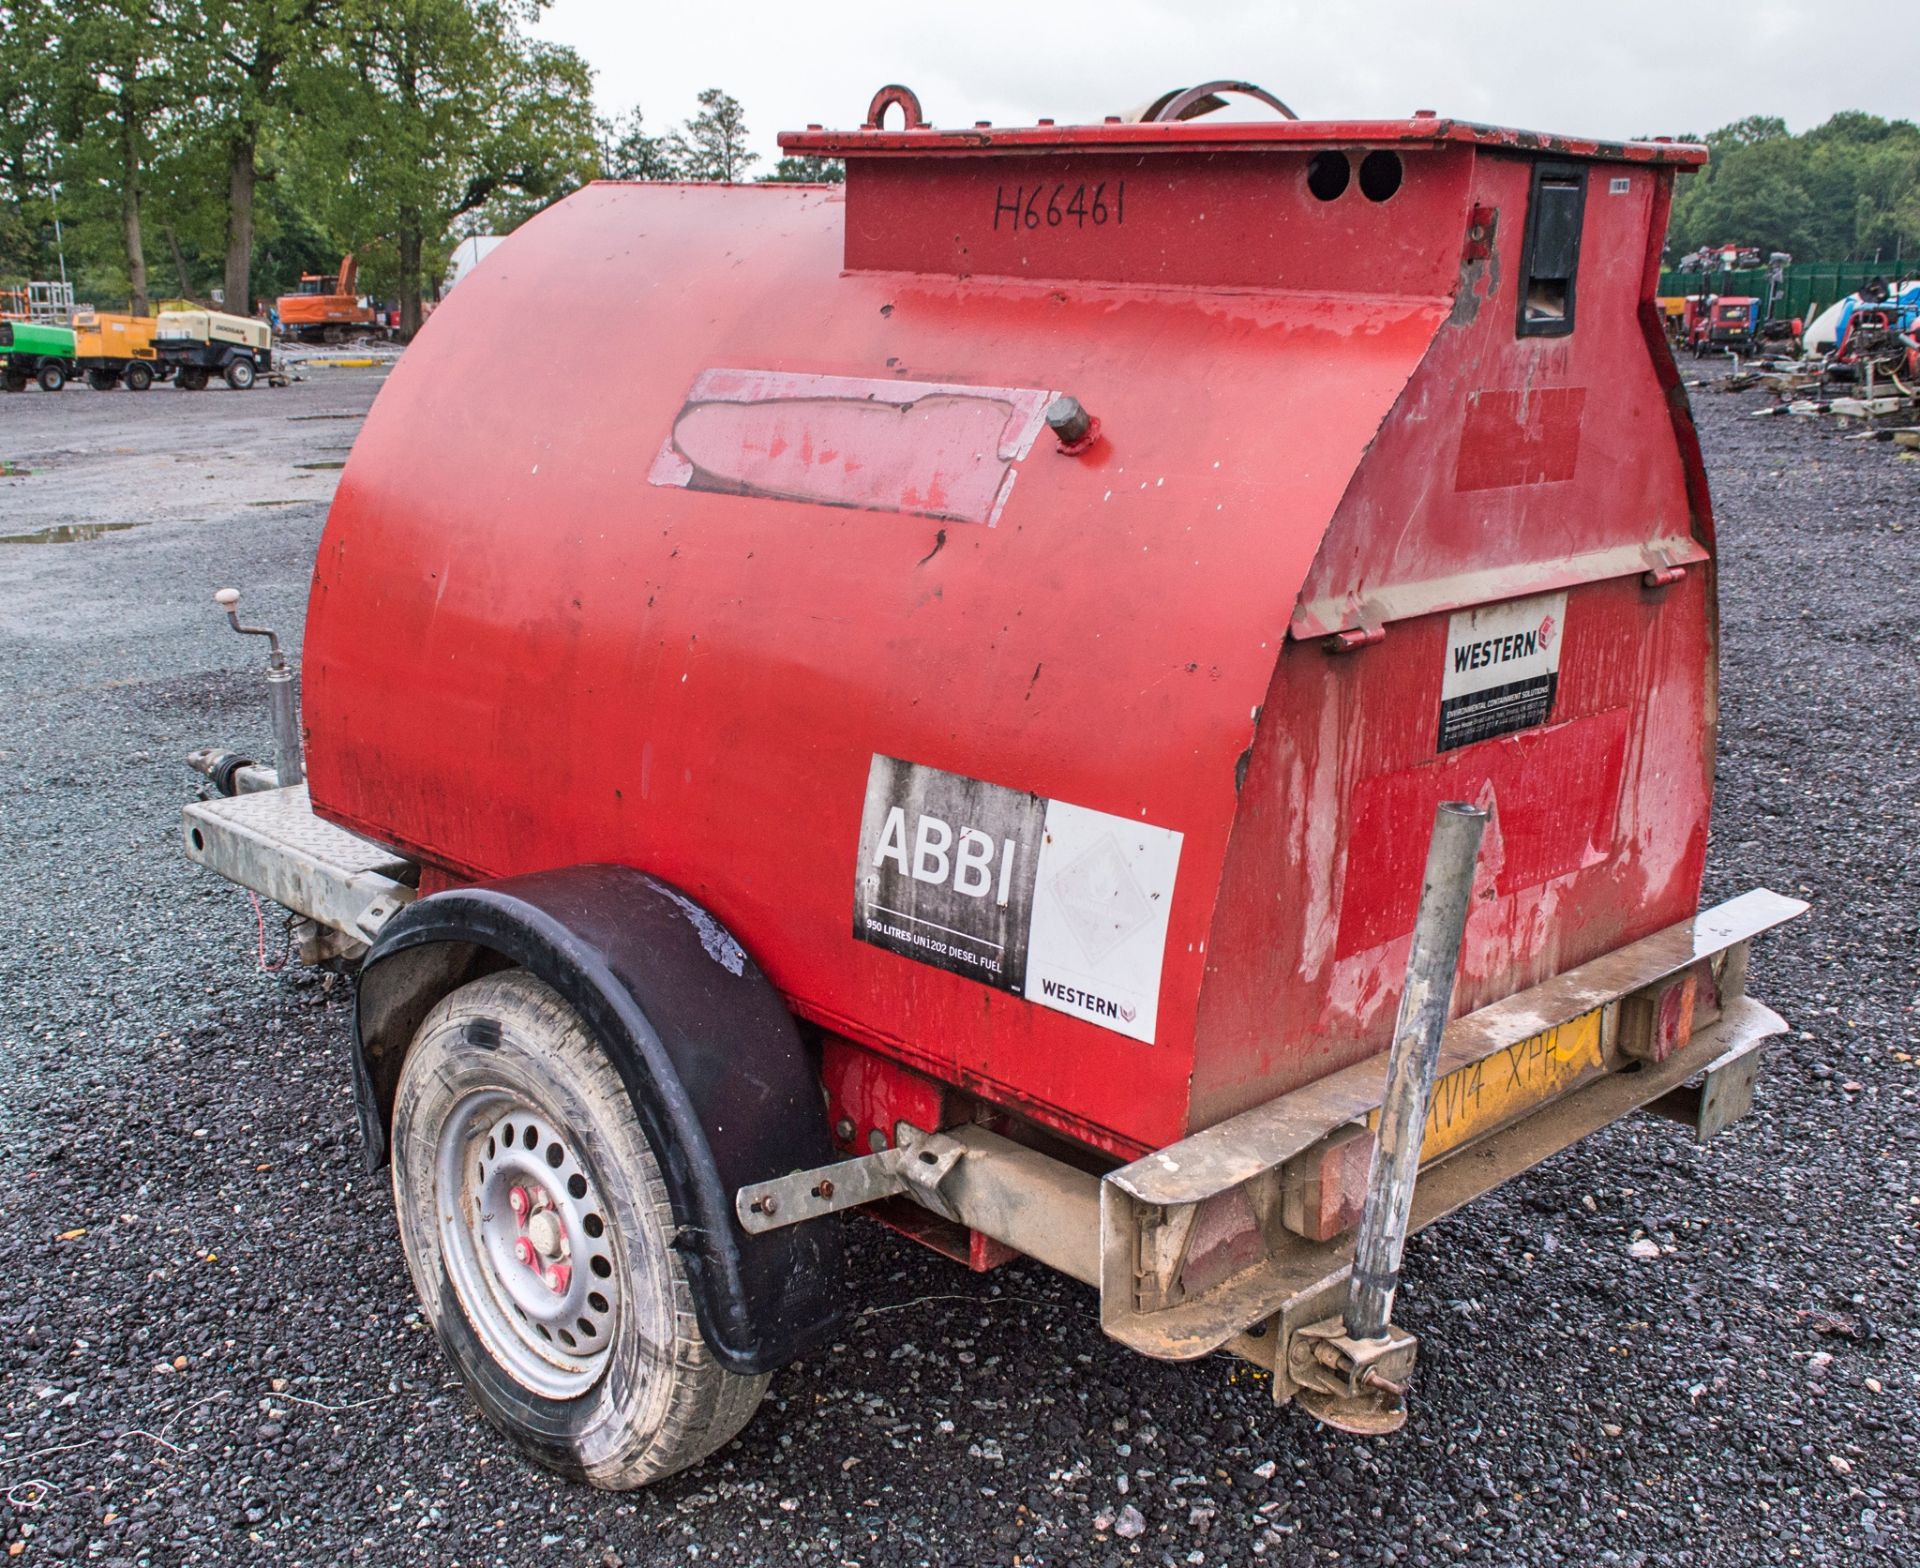 Western 950 litre fast tow bunded fuel bowser c/w hand pump, delivery hose & trigger nozzle H66461 - Image 2 of 3